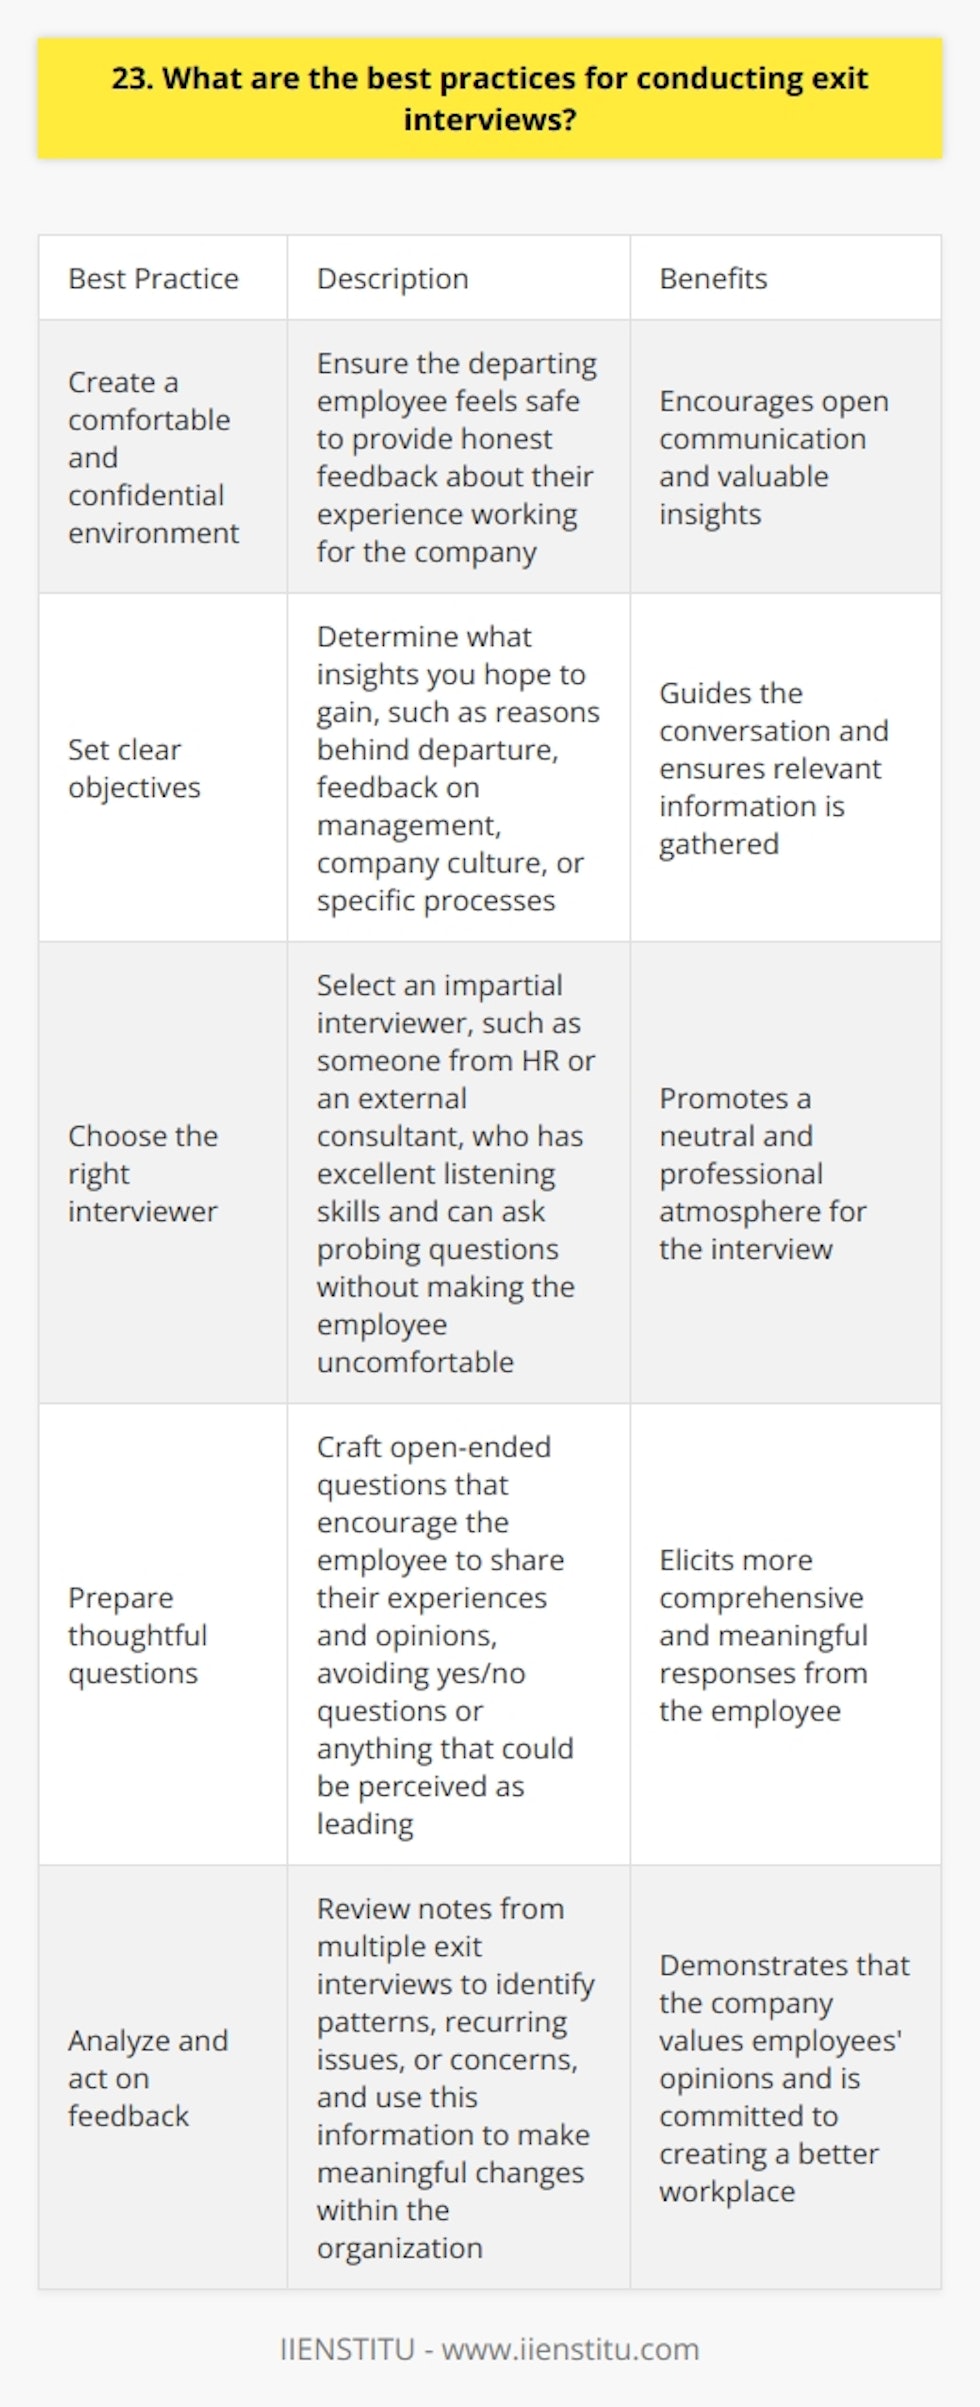 When conducting exit interviews, its crucial to create a comfortable and confidential environment for the departing employee. This encourages them to provide honest feedback about their experience working for the company. Set Clear Objectives Before the interview, determine what insights you hope to gain. Do you want to understand the reasons behind their departure? Are you looking for feedback on management, company culture, or specific processes? Having clear objectives helps guide the conversation. Choose the Right Interviewer Select an interviewer who is impartial and not directly involved in the employees day-to-day work. This could be someone from HR or an external consultant. The interviewer should have excellent listening skills and be able to ask probing questions without making the employee feel uncomfortable. Prepare Thoughtful Questions Craft open-ended questions that encourage the employee to share their experiences and opinions. Avoid yes/no questions or anything that could be perceived as leading. Some example questions include: Listen Actively and Take Notes During the interview, give the employee your full attention. Make eye contact, nod, and encourage them to continue speaking. Take detailed notes so you can refer back to them later and identify common themes across multiple exit interviews. Analyze and Act on Feedback After conducting several exit interviews, review your notes and look for patterns. Are there recurring issues or concerns? Use this information to make meaningful changes within the organization. By acting on feedback, you demonstrate that you value employees opinions and are committed to creating a better workplace. Remember, exit interviews are just one piece of the puzzle. To get a complete picture of your companys strengths and weaknesses, combine insights from exit interviews with regular employee surveys and feedback sessions.